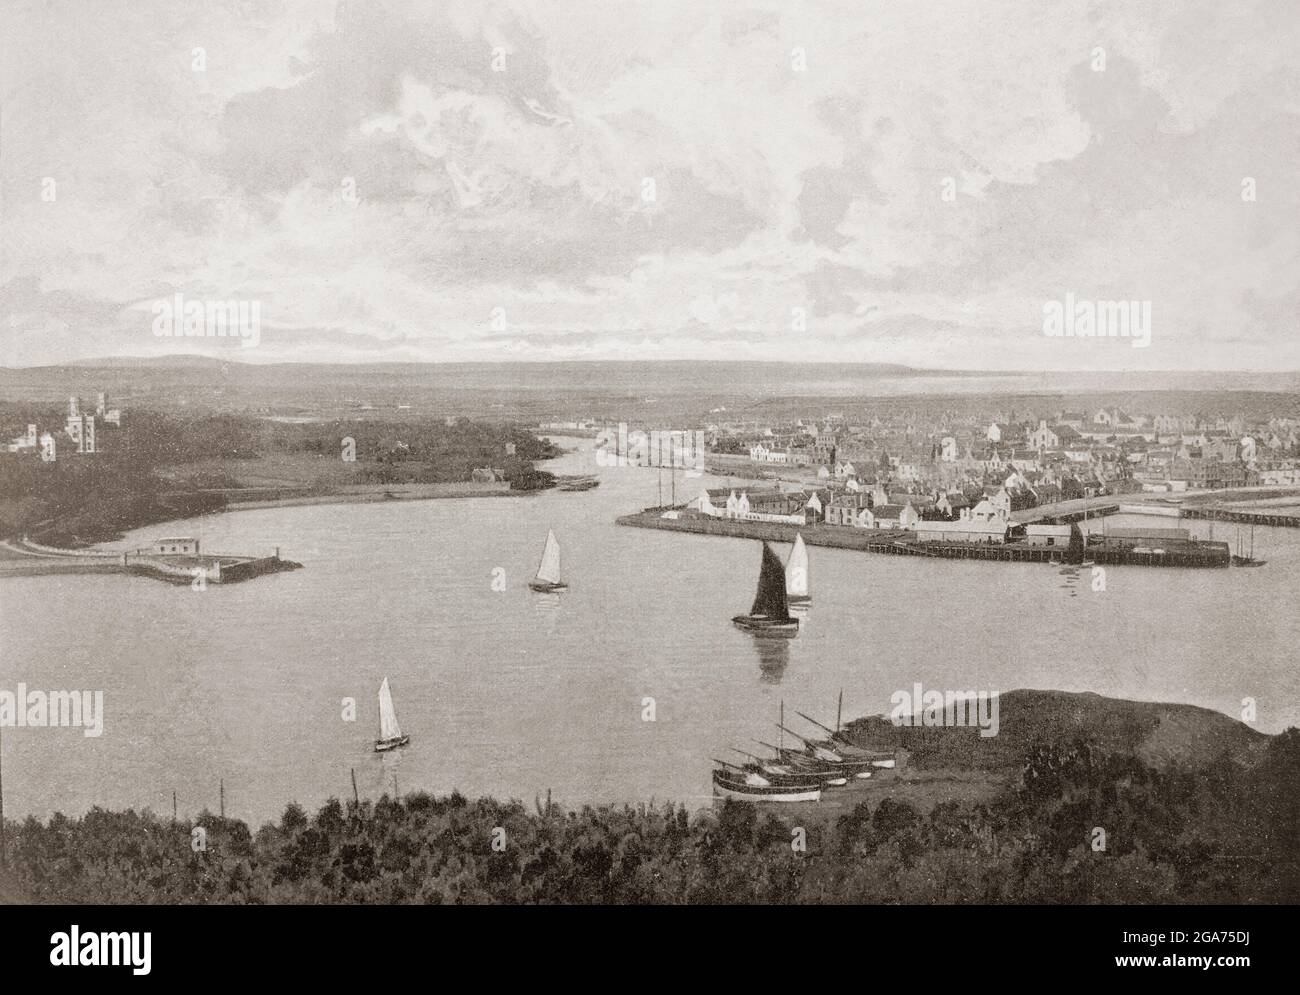 A late 19th century view of the harbour in Stornoway, the main town of the Western Isles and the capital of Lewis and Harris in the Outer Hebrides, Scotland. The sheltered harbour is the reason for the towns existence and was named by the visiting Vikings 'Steering Bay' which, when phonetically translated, became the name Stornoway. Stornoway is the main port on the Island, due to its sheltered location with the ferry to Ullapool a regular visitor. Stock Photo